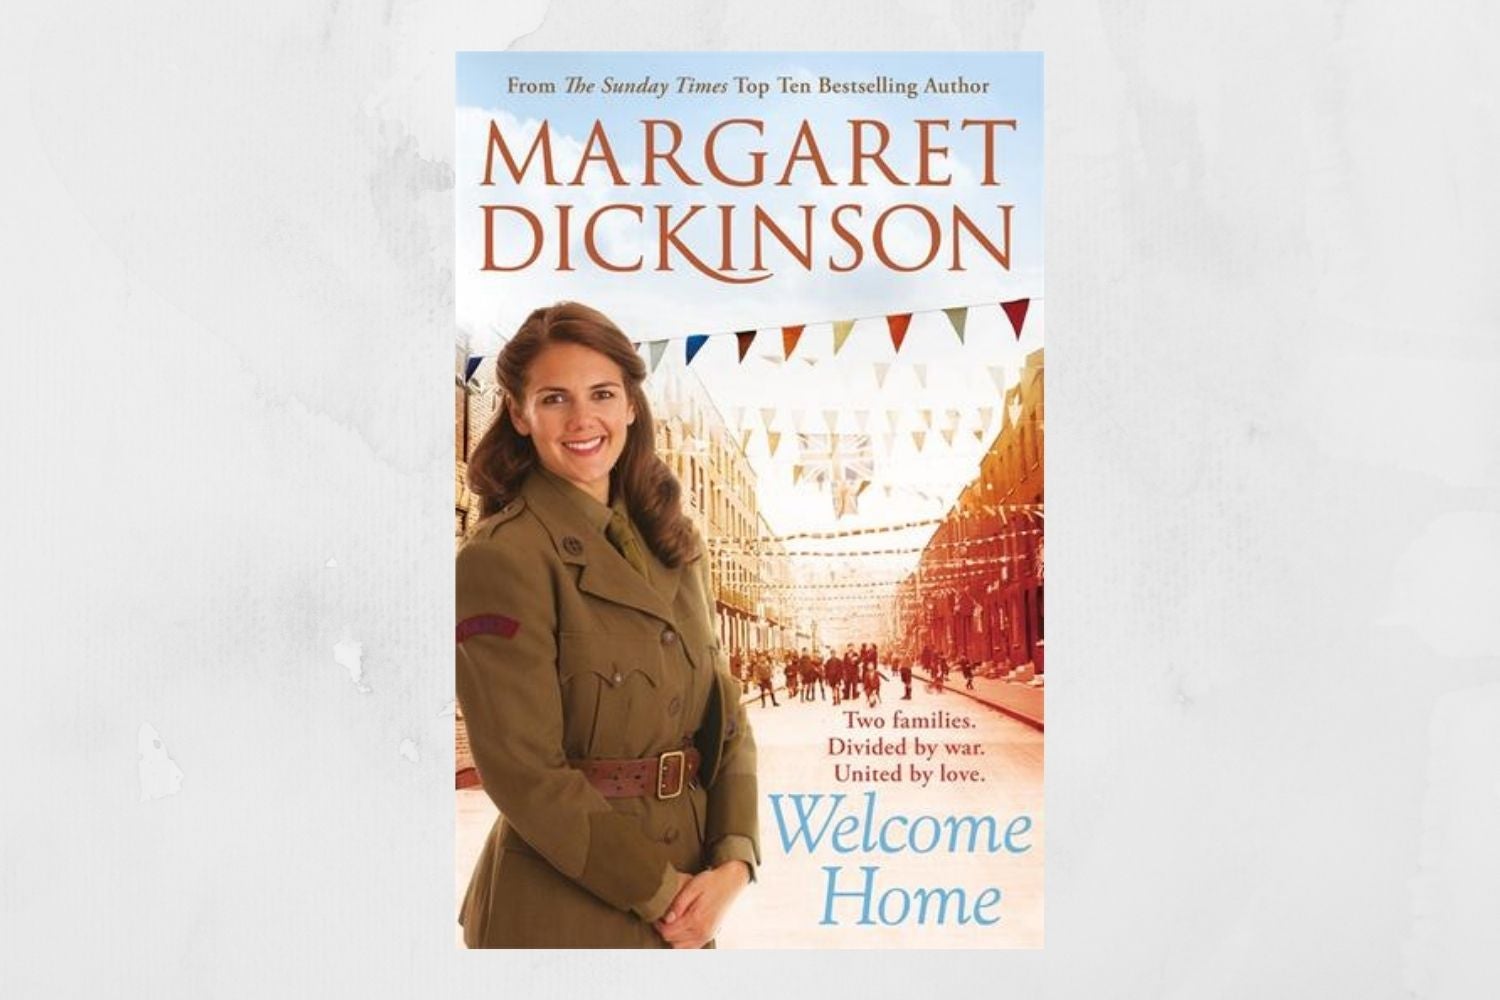 Welcome Home by Margaret Dickinson book cover